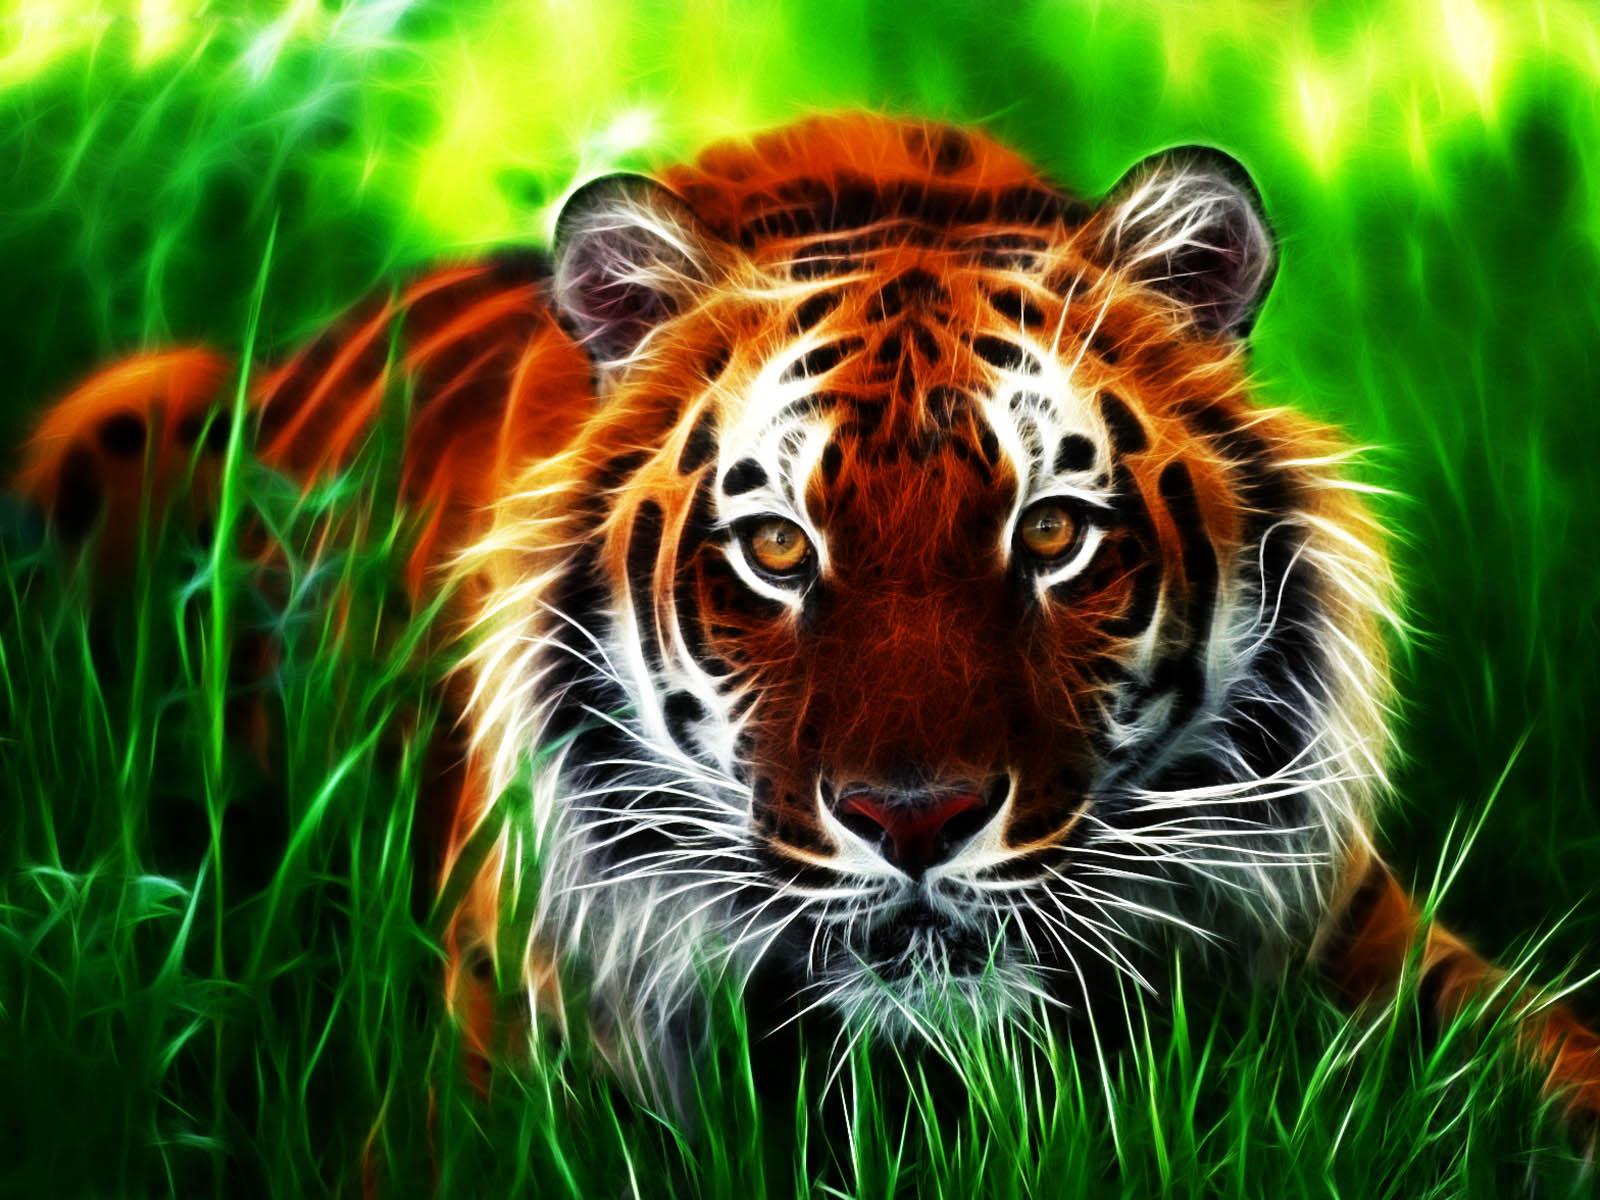 Tag: Tiger 3D Wallpaper, Image, Photo, Picture and Background